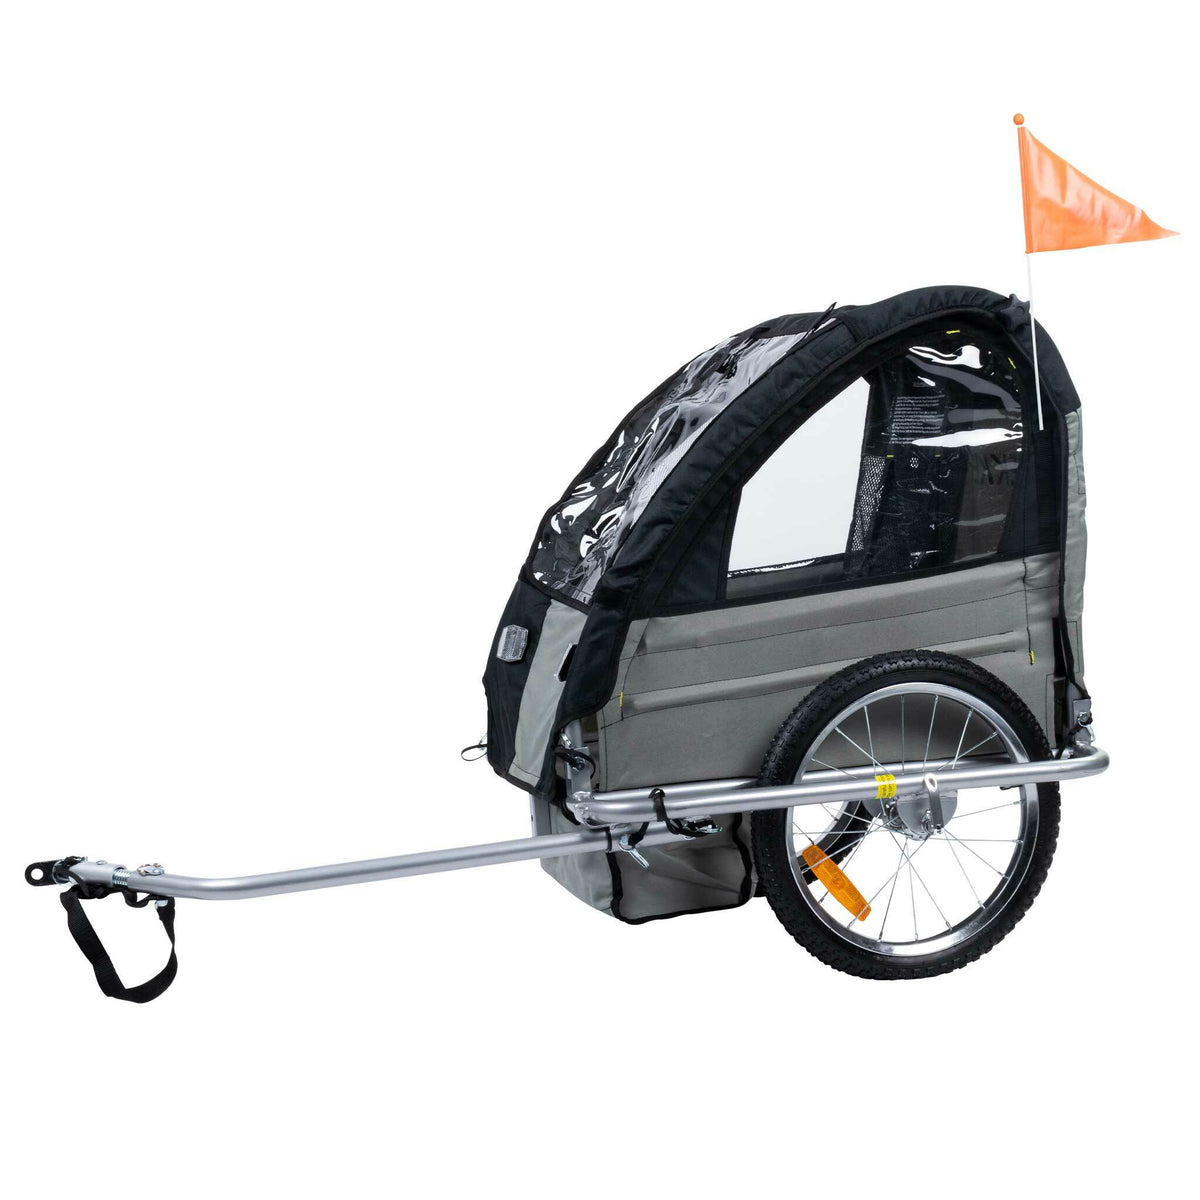 Bike Trailers & Carriers for Kids - Best Comfort - Shop Now